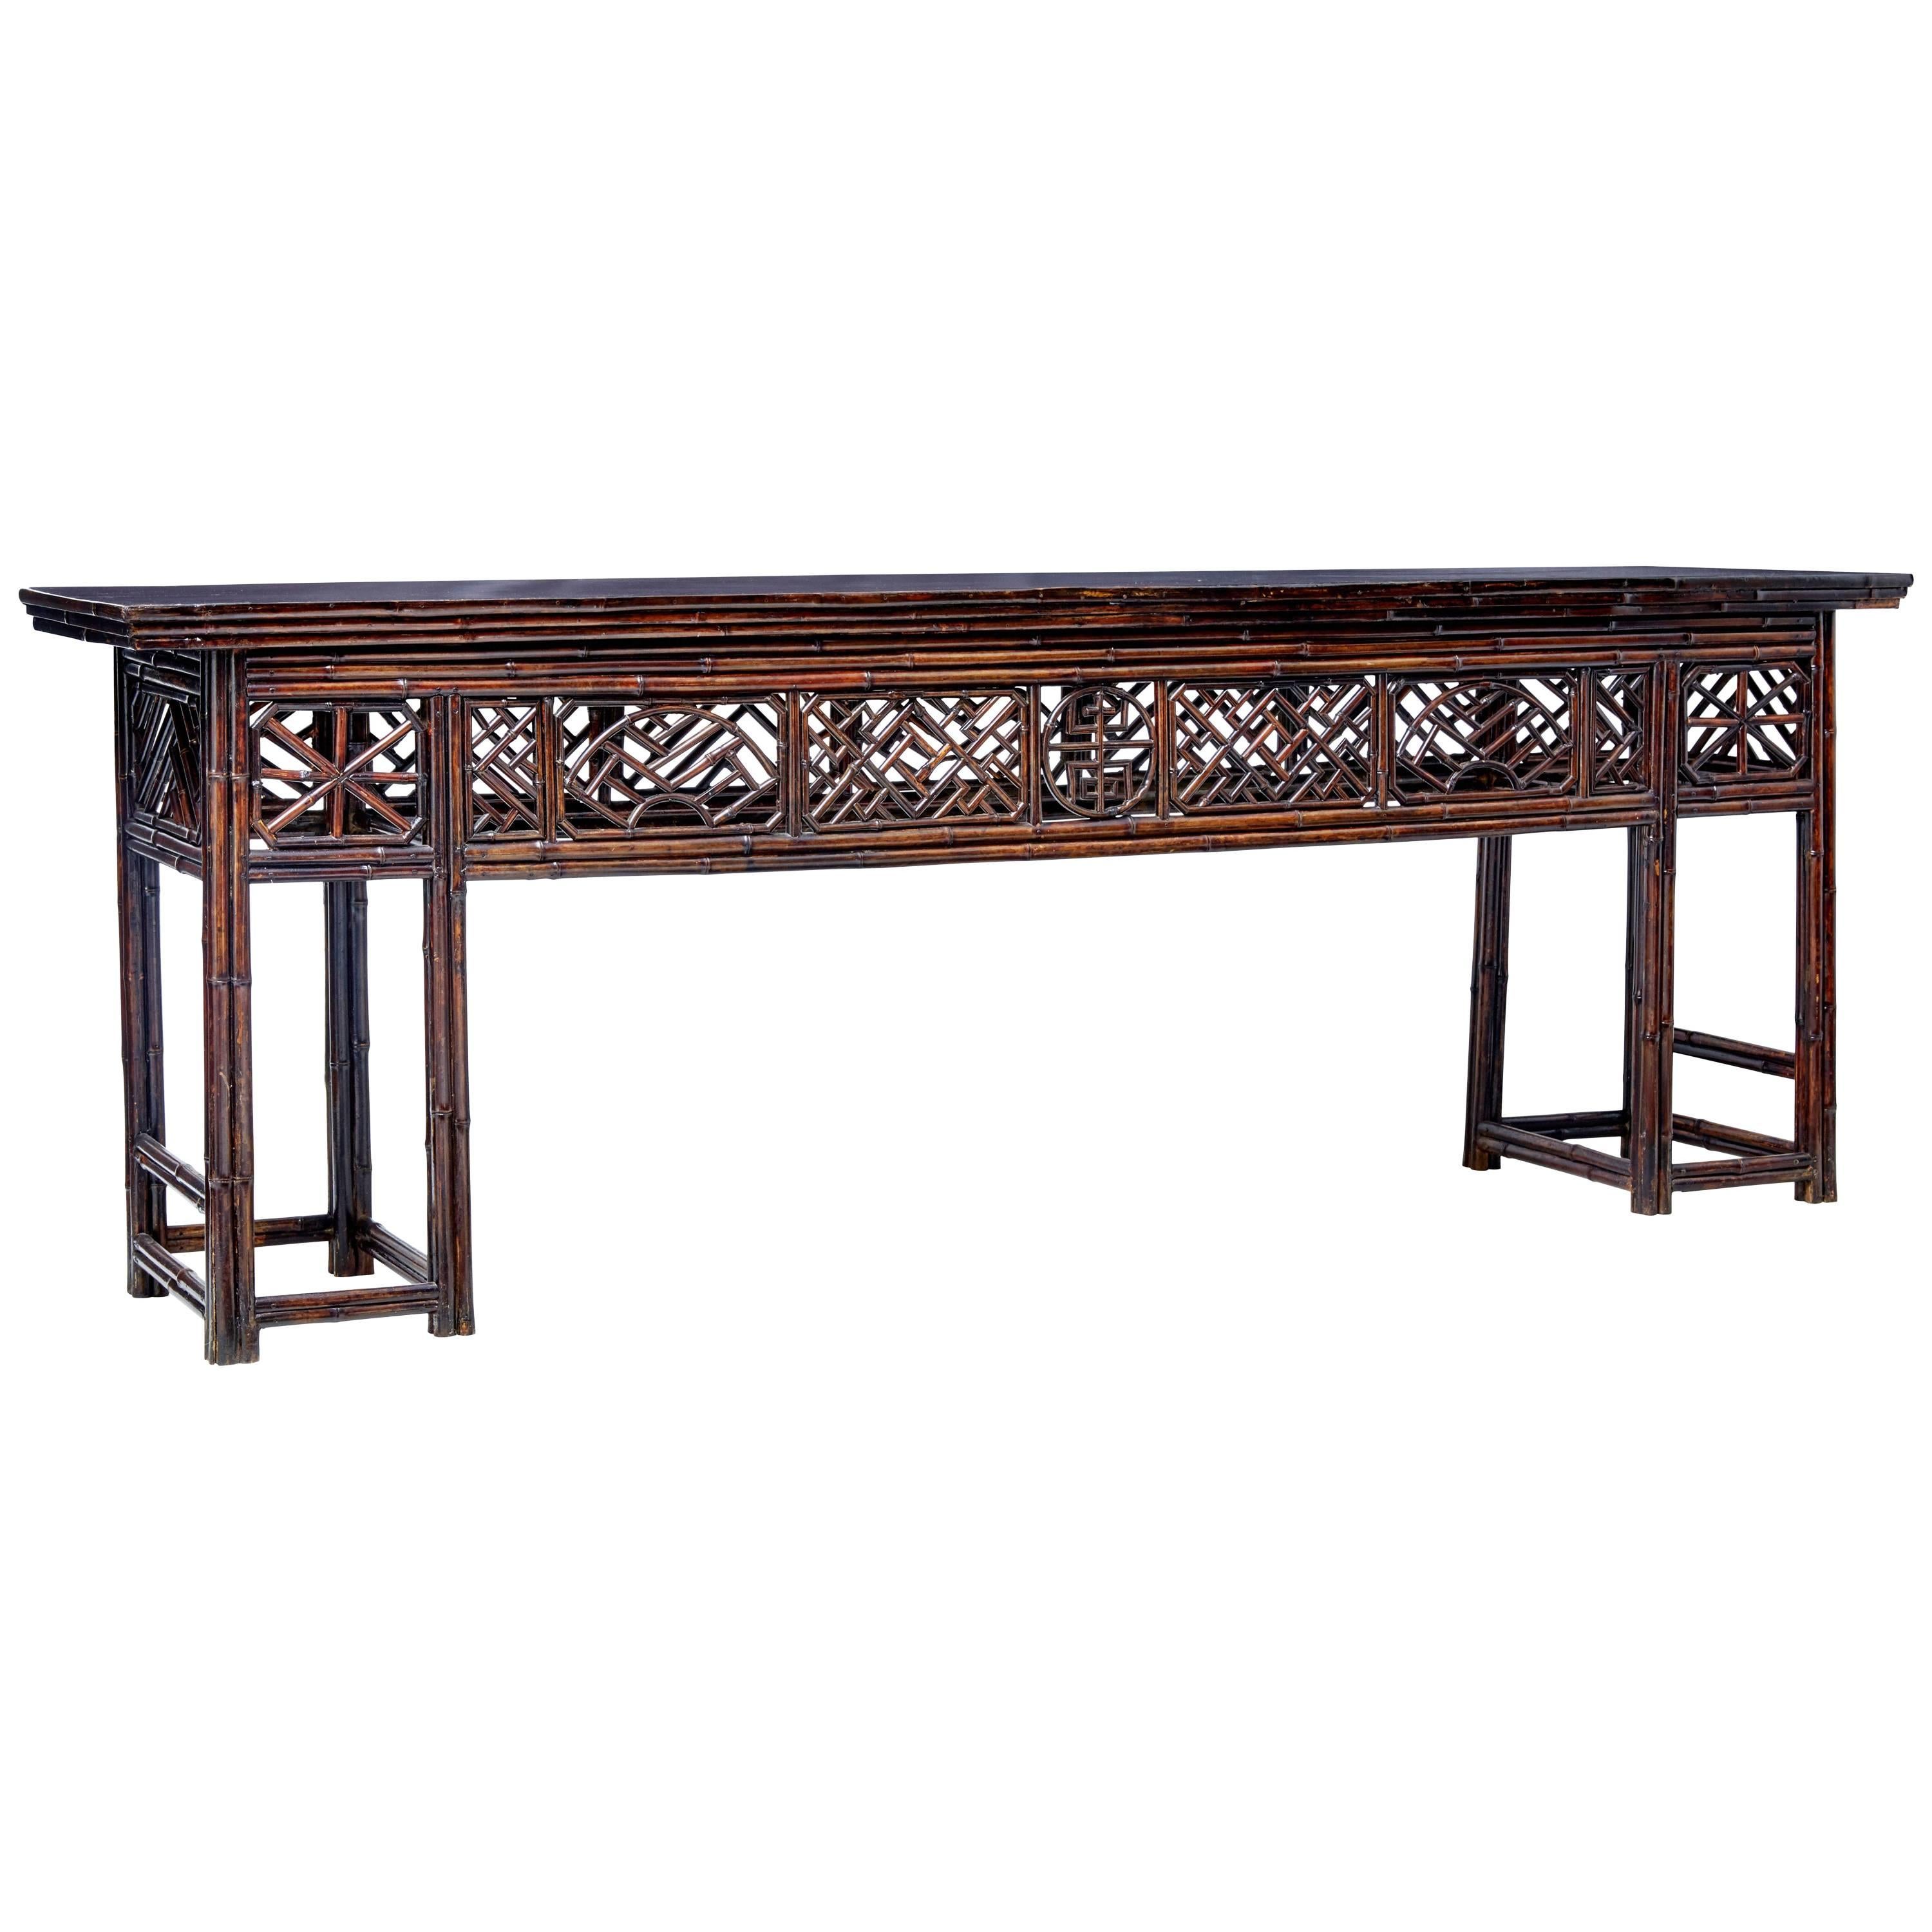 Large Late 19th Century Chinese Cane and Lacquer Consol Table